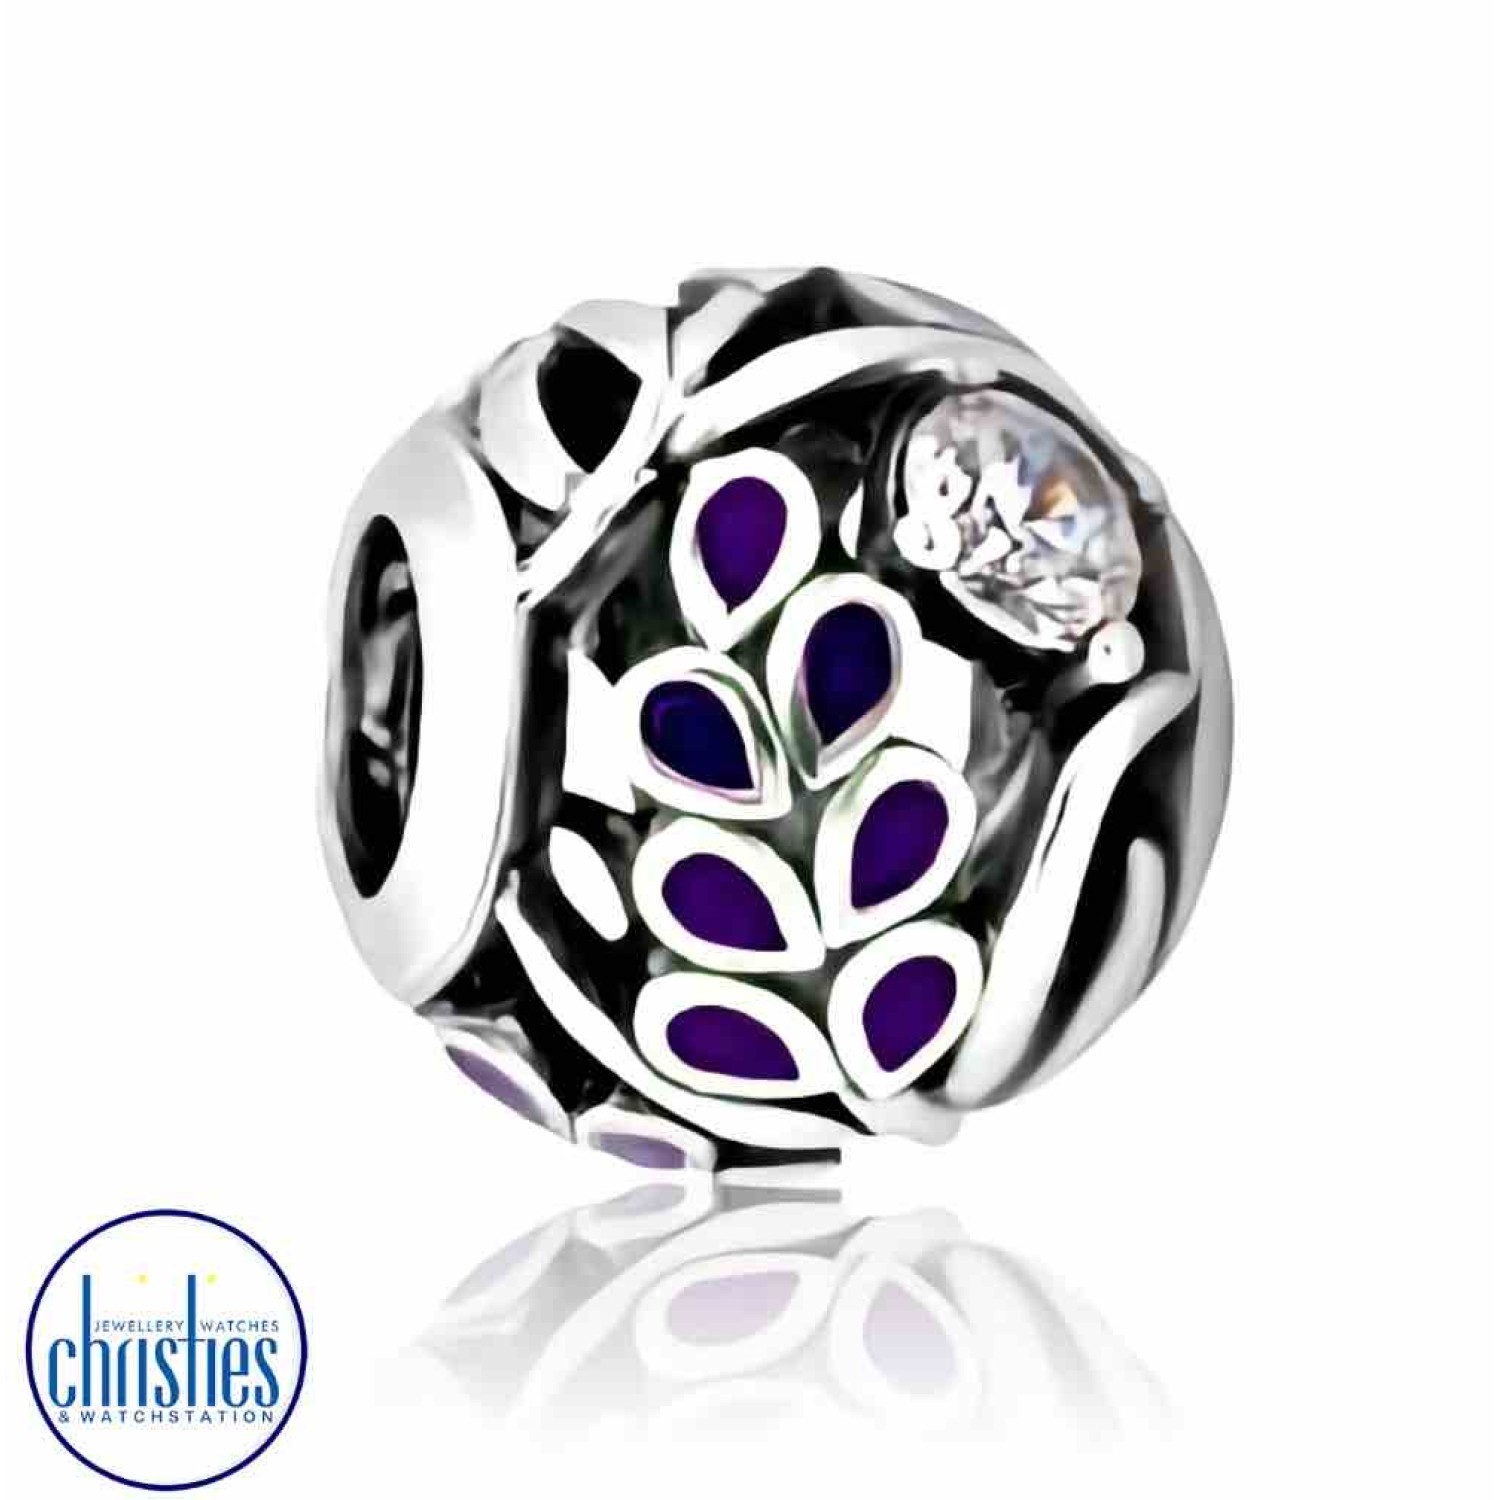 LKE074 Evolve Jewellery Lavender Charm. The calming scent of lavender has become key foliage amongst New Zealand gardens. Known for its anxiety- reducing effect, lavender also symbolises elegance.The tall stems swaying in the breeze reminds us of perfectl